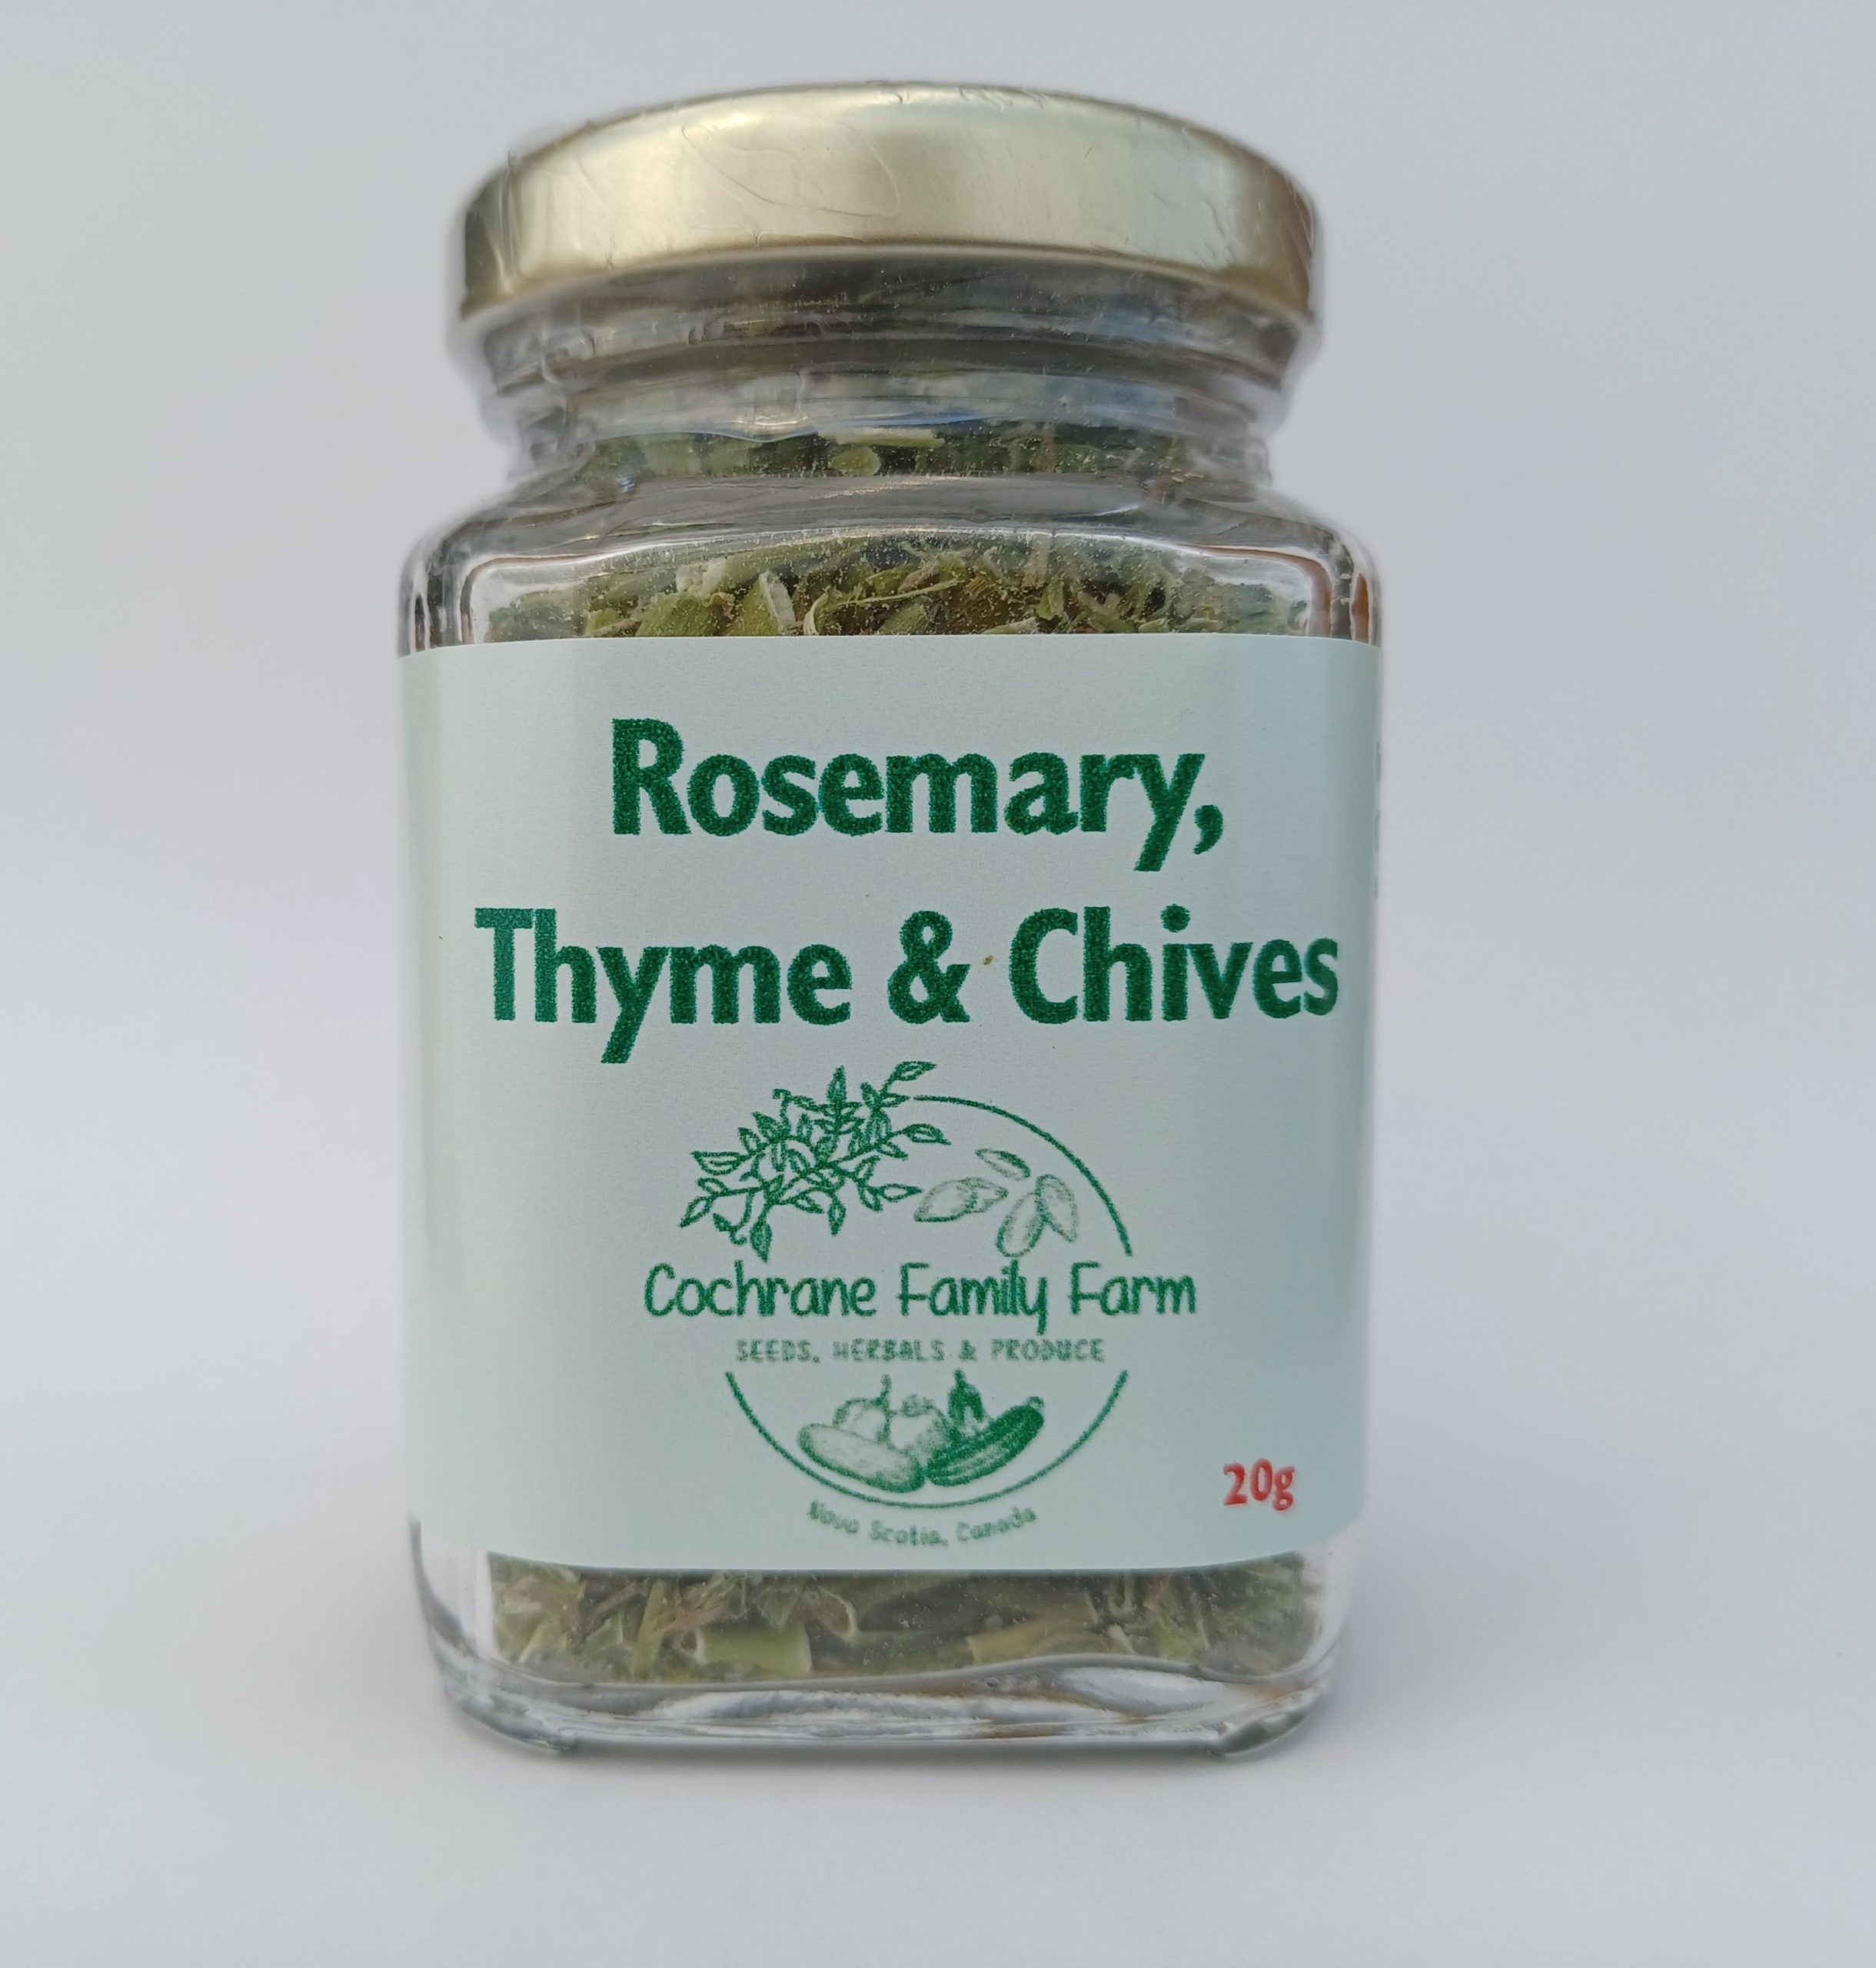 Rosemary, Thyme & Chives Certified Organic